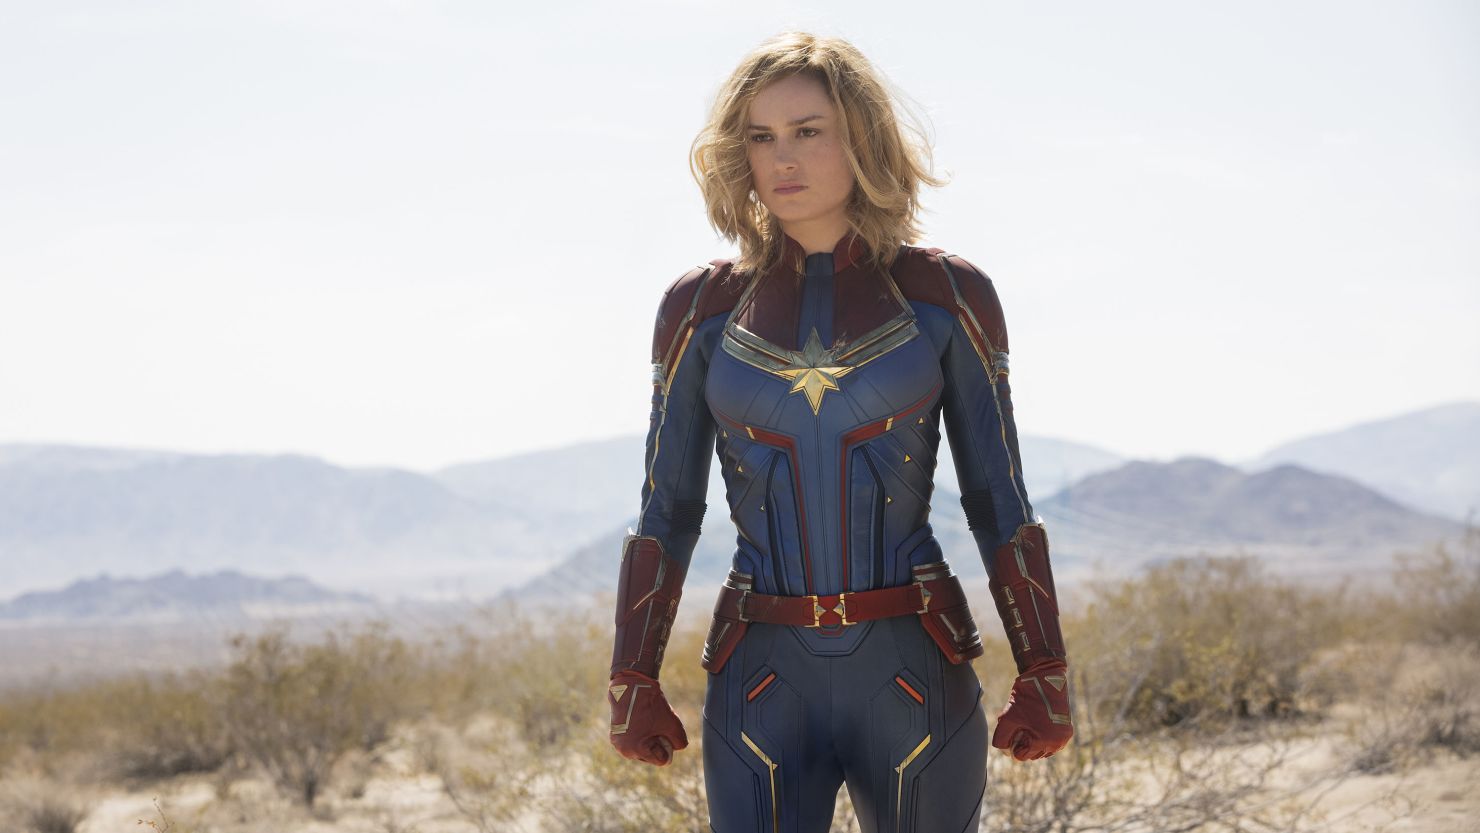 Brie Larson starred in Marvel Studios' "Captian Marvel." The film, in which Larson played Carol Danvers, was one of the top-grossing films of 2019.